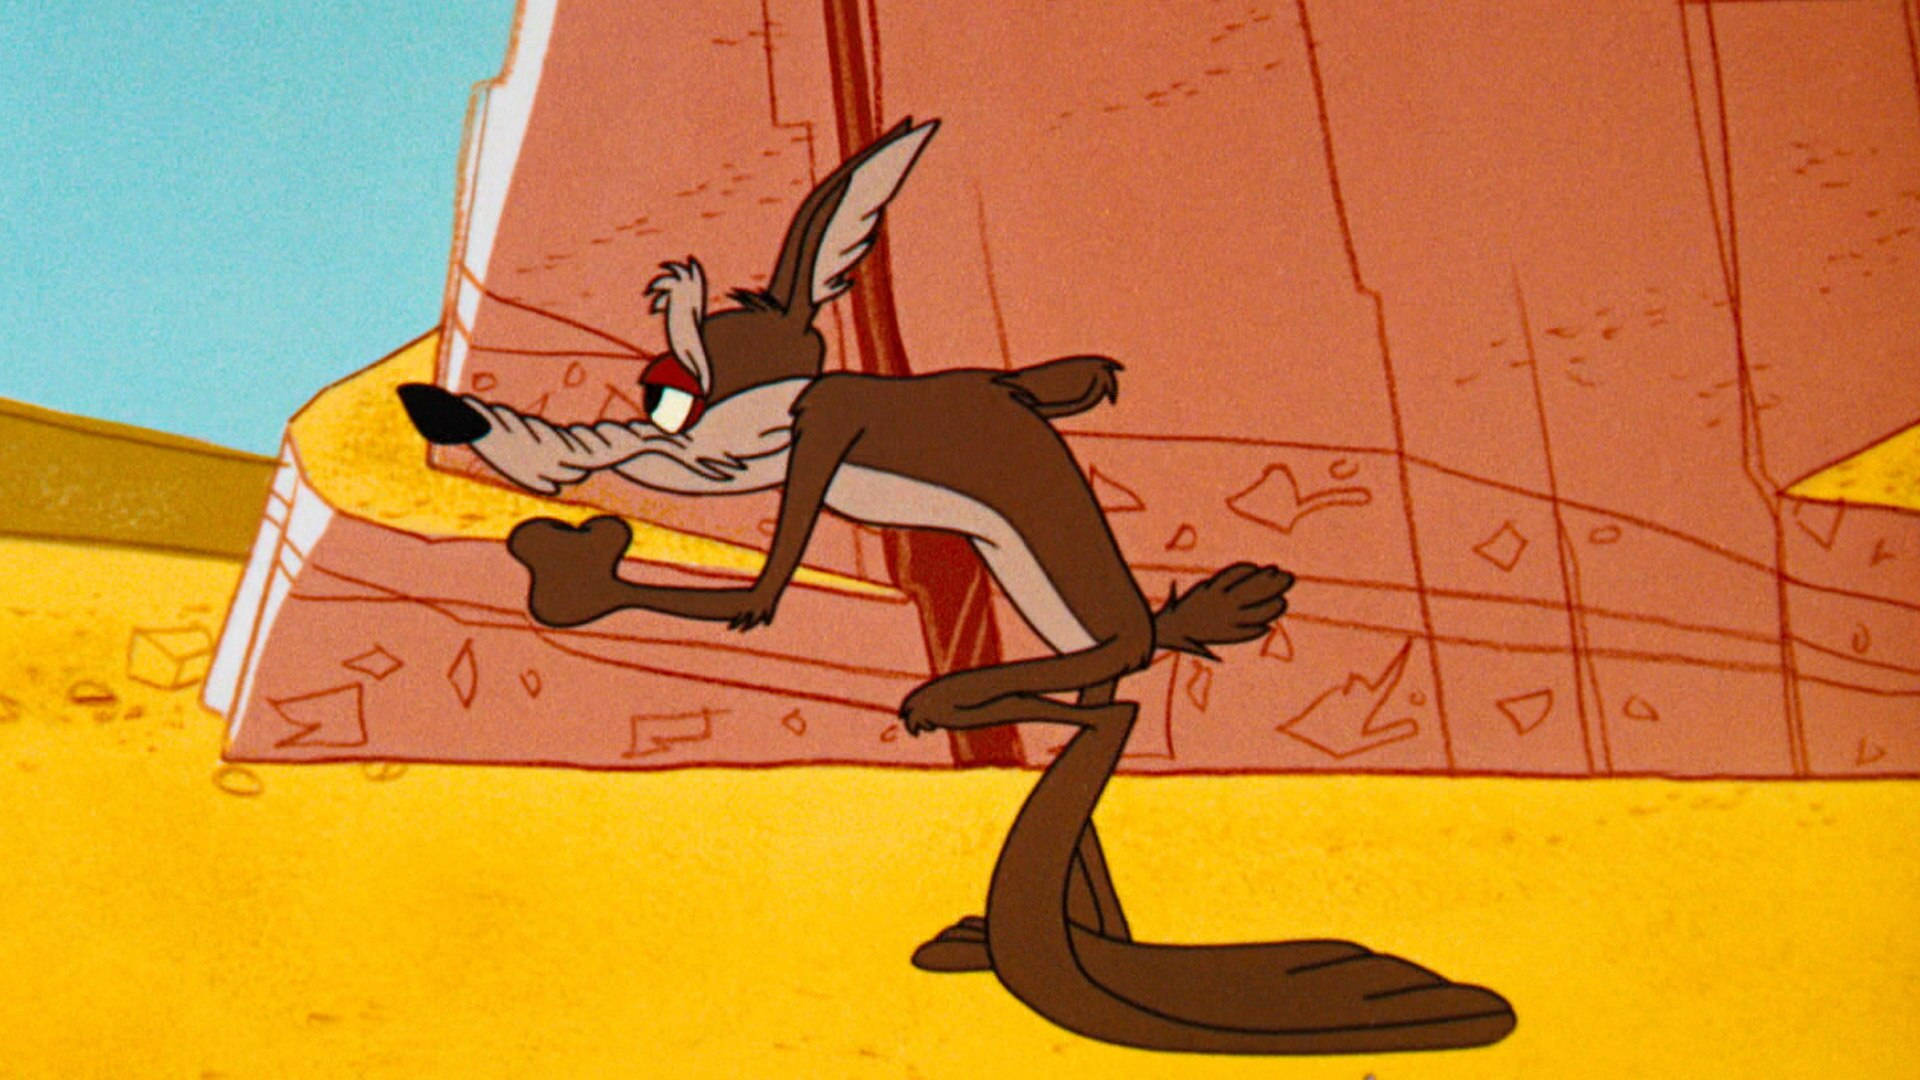 Wile E. Coyote Exhausted After Numerous Failed Attempts. Background